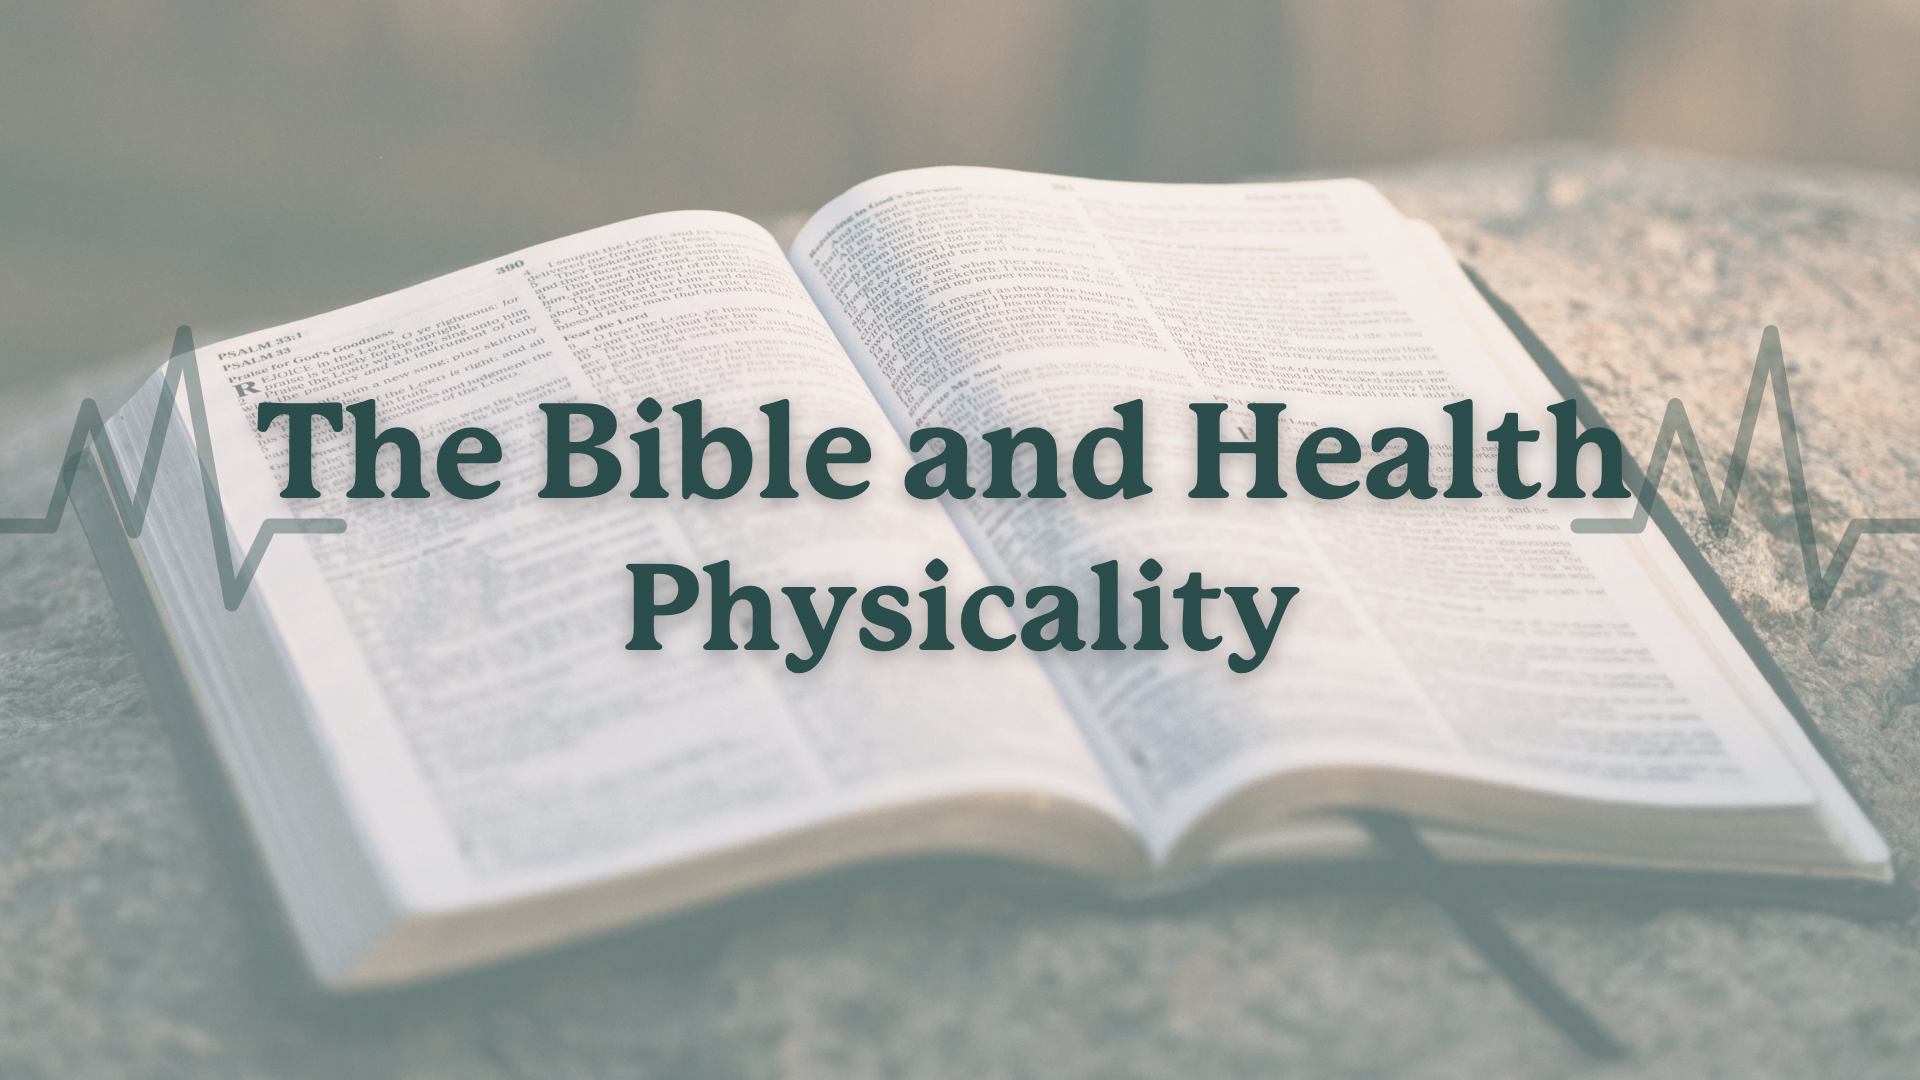 Sunday Service - The Bible & Health - Physicality